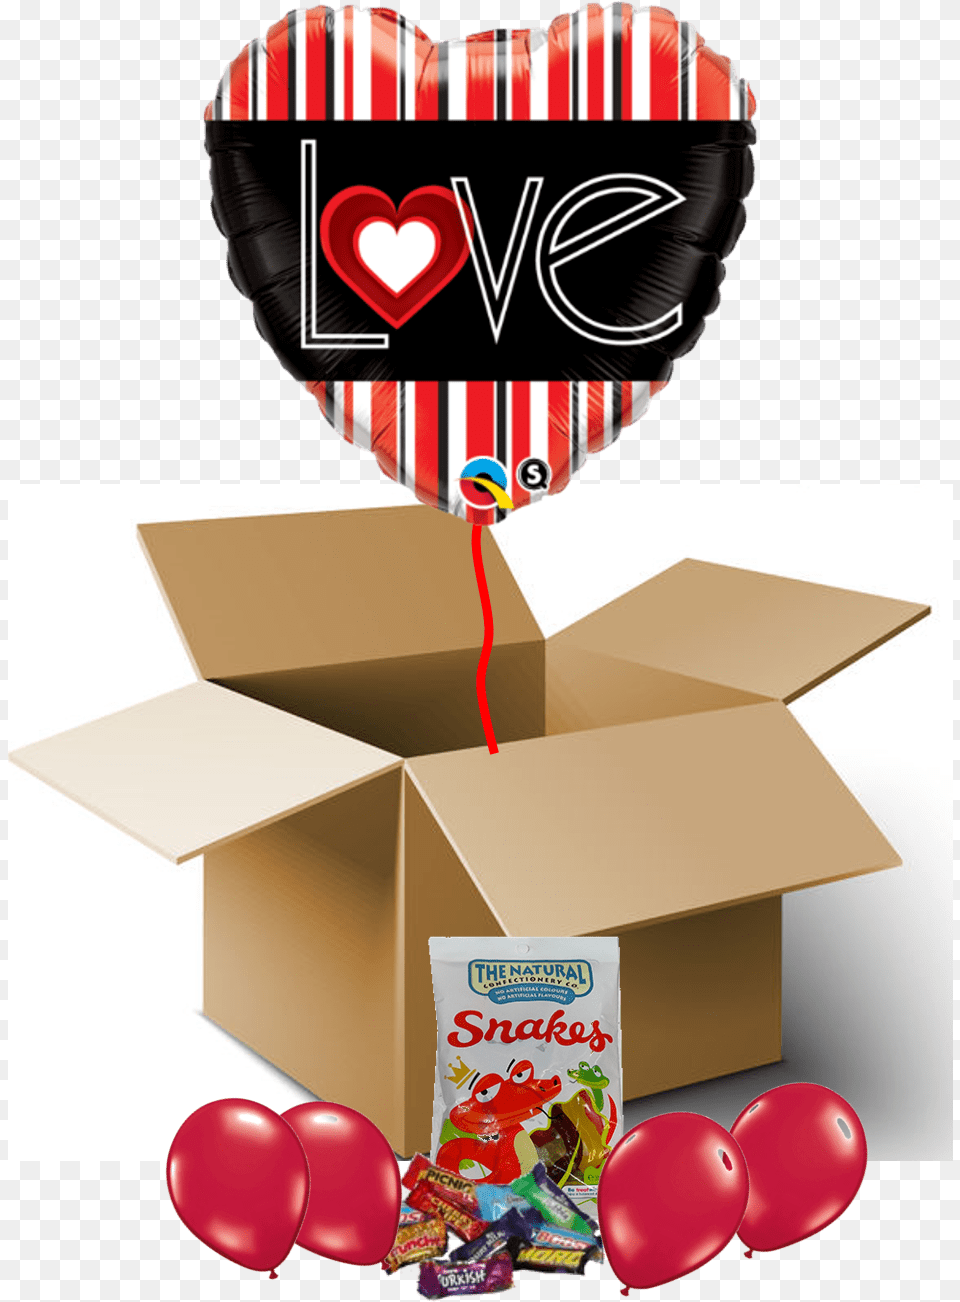 Love Balloon In A Box Clipart Download Jungle Theme Birthday Wishes, Cardboard, Carton Png